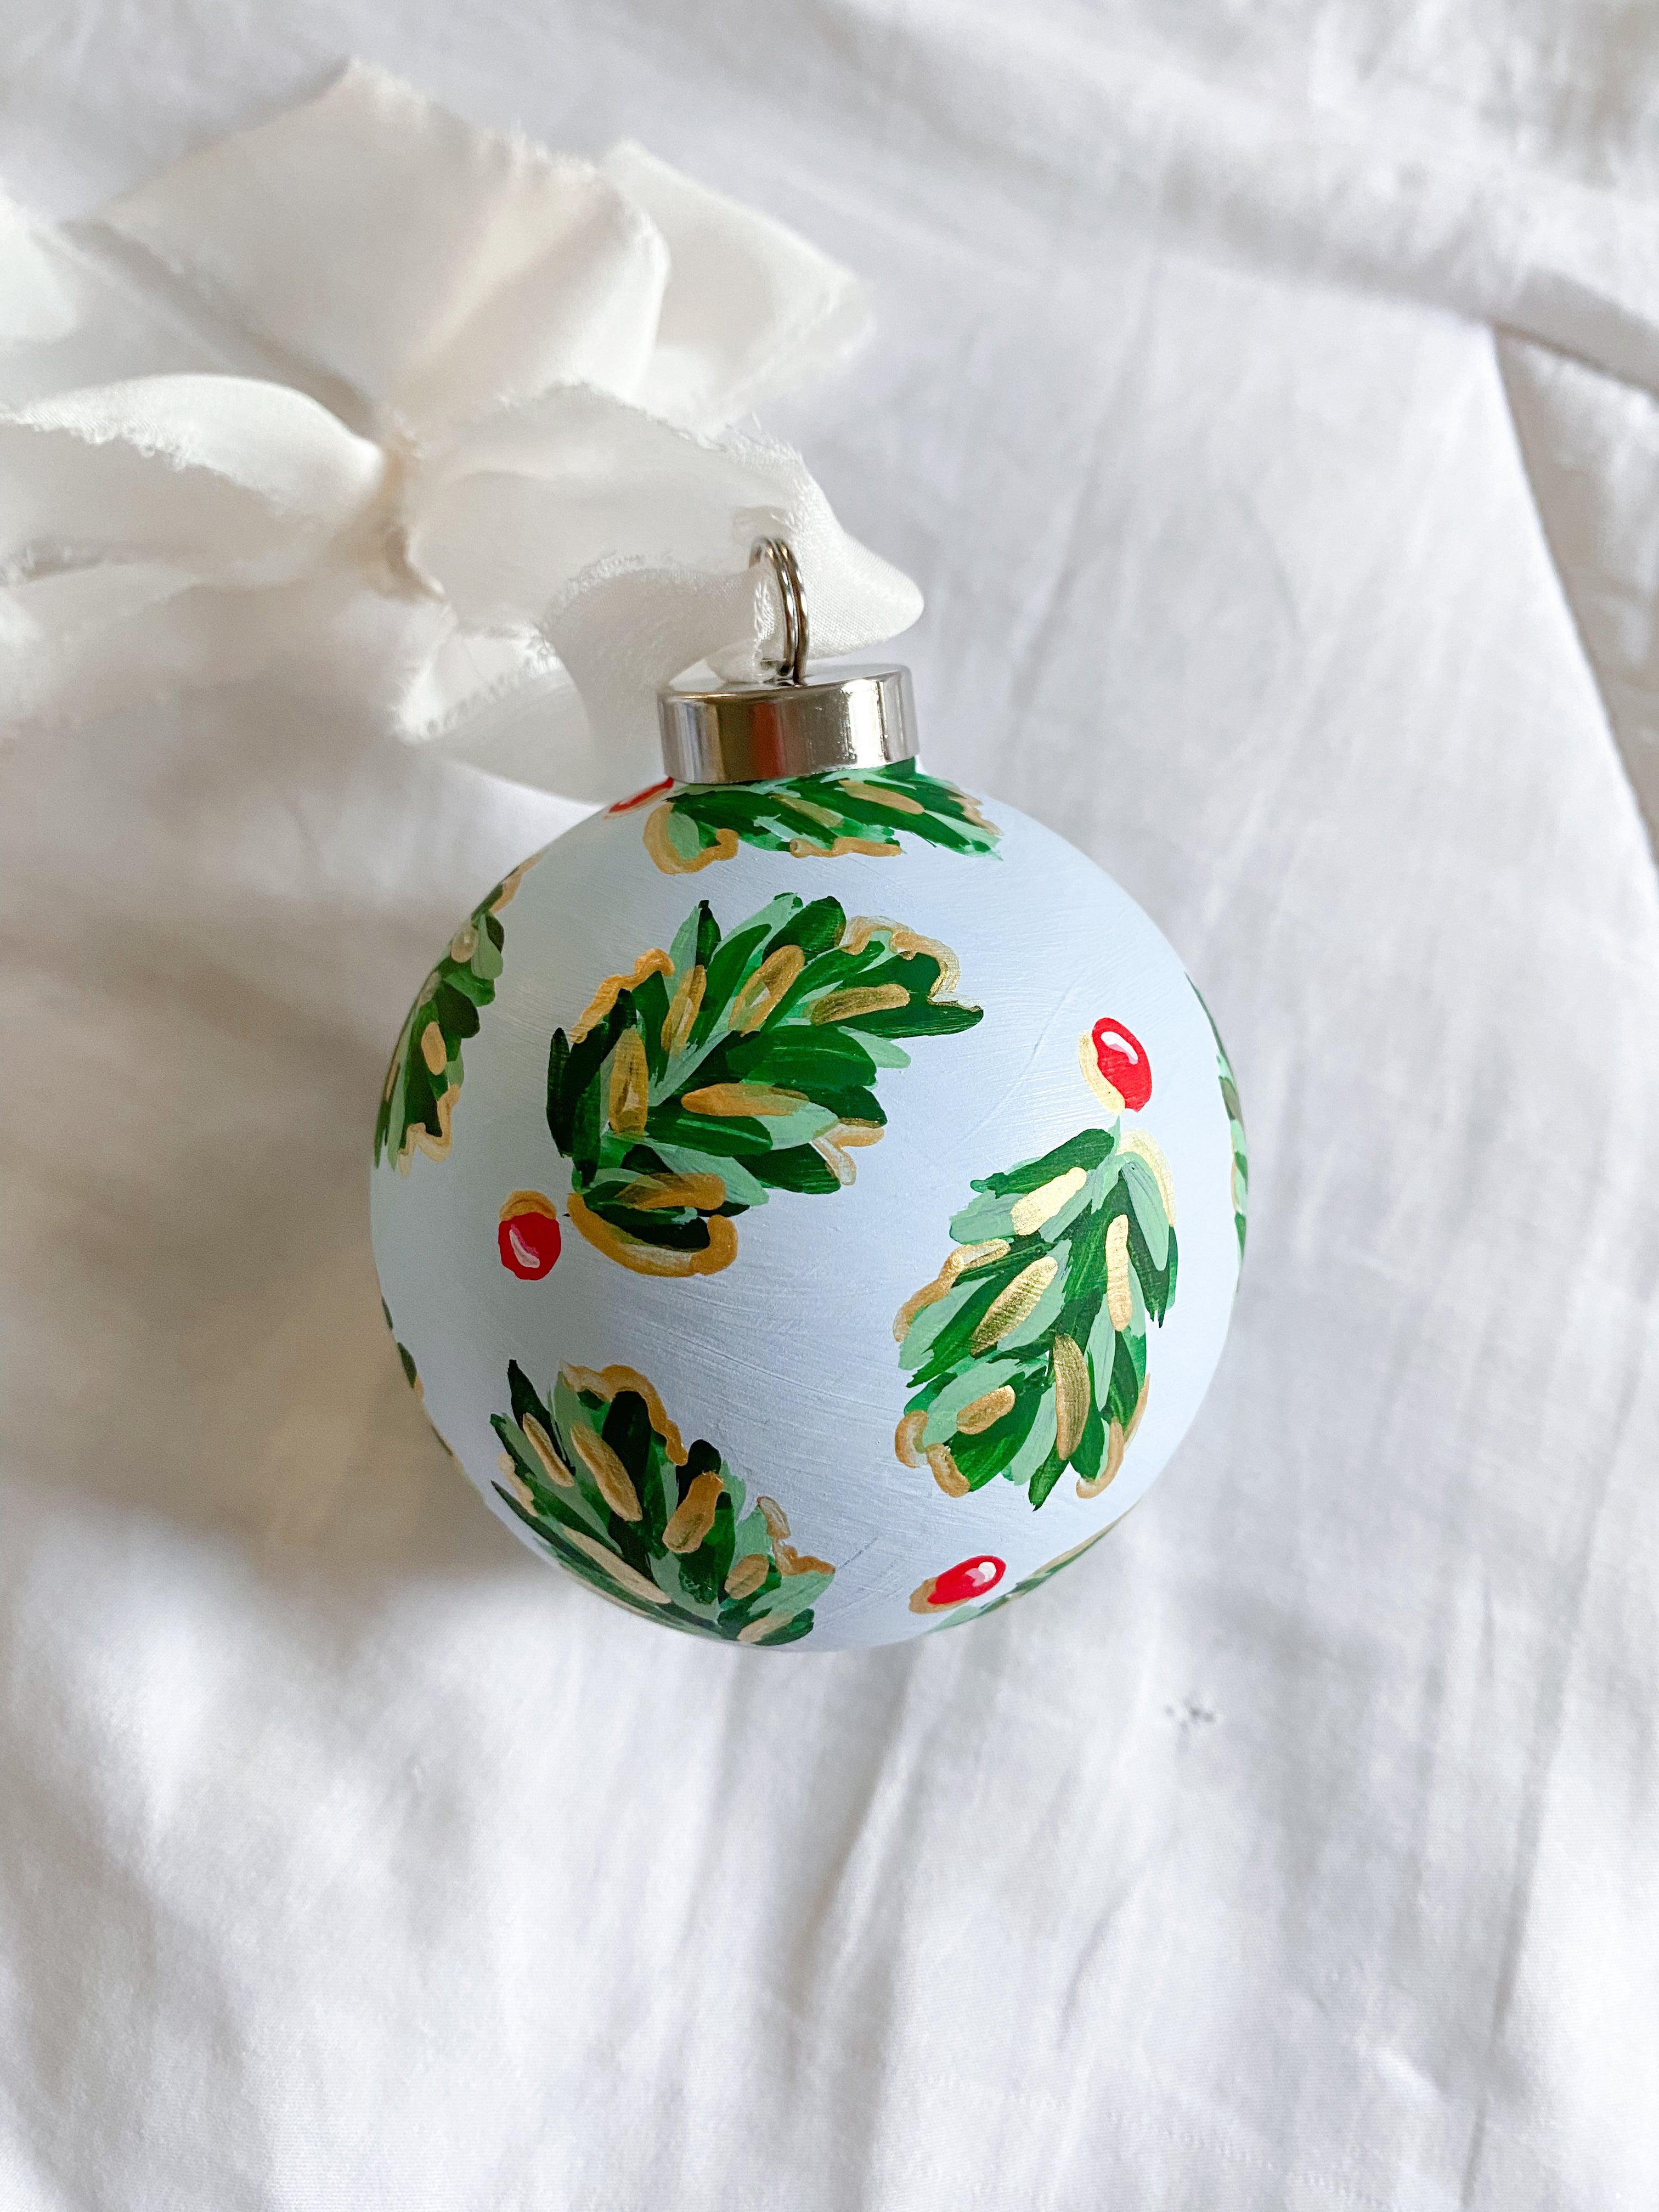 Icy Blue Golden Holly Bauble-Ceramic Hand-Painted Keepsake Ornament | Measuring 3" x 3" | Features the Golden Holly design with a light blue base and shimmery gold accents | Coated with a protective matte finish that will keep it protected and shimmering year after year | Your color choice of silk crepe ribbon with a frayed edge for hanging | Each bauble is slightly different with potential small imperfections due to the hand-painted nature, making each one special and unique!-The Singing Little Bird